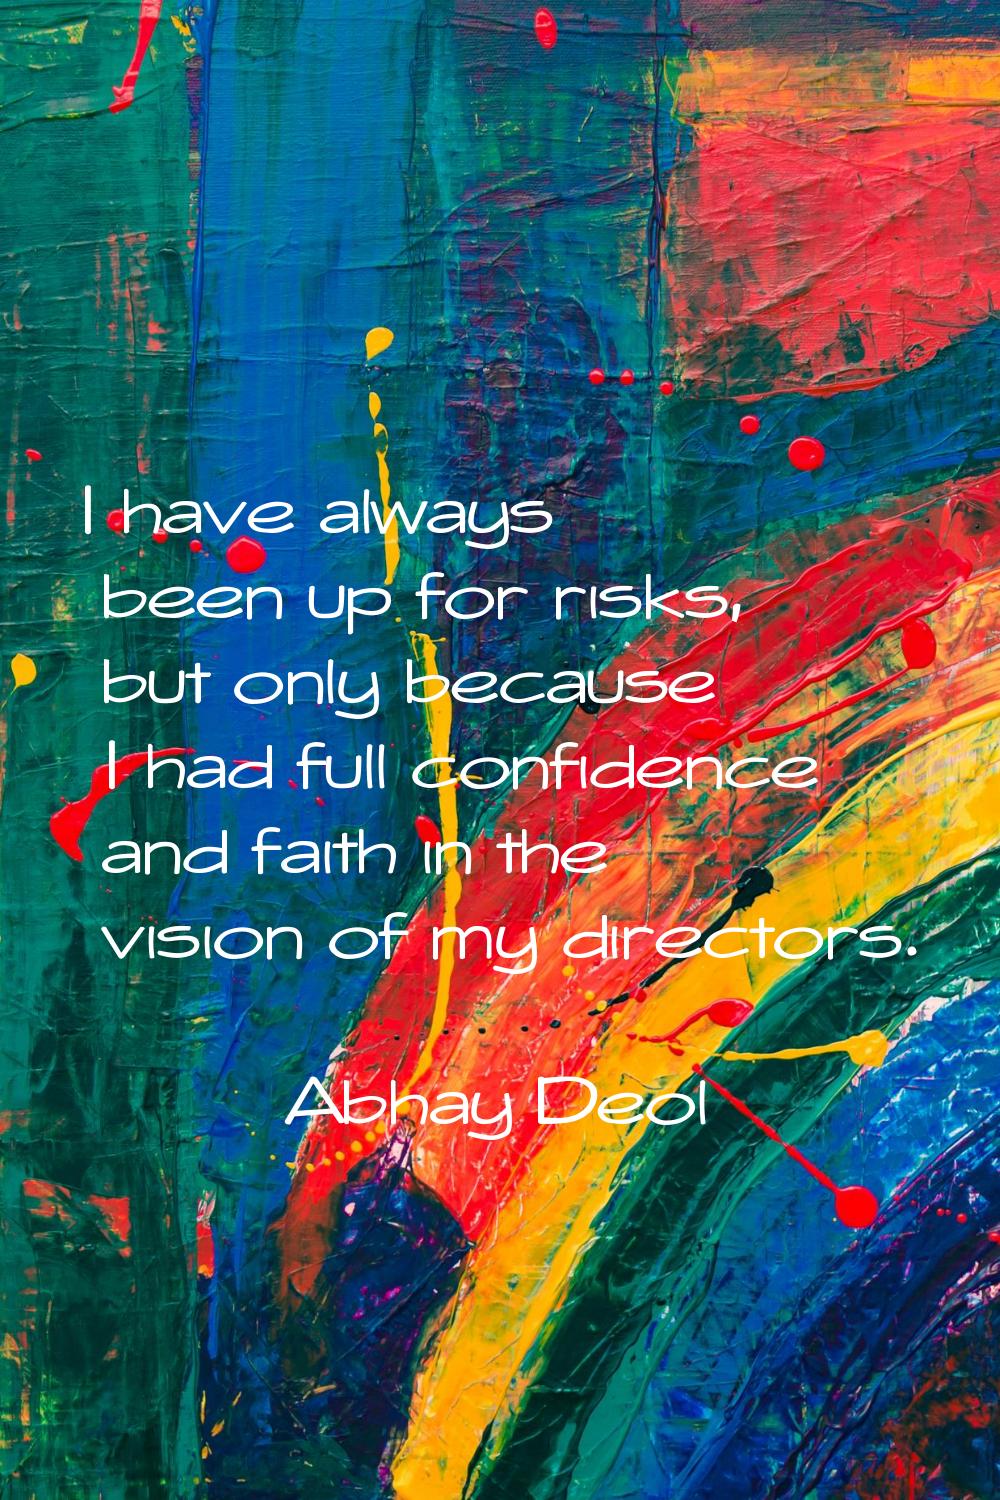 I have always been up for risks, but only because I had full confidence and faith in the vision of 